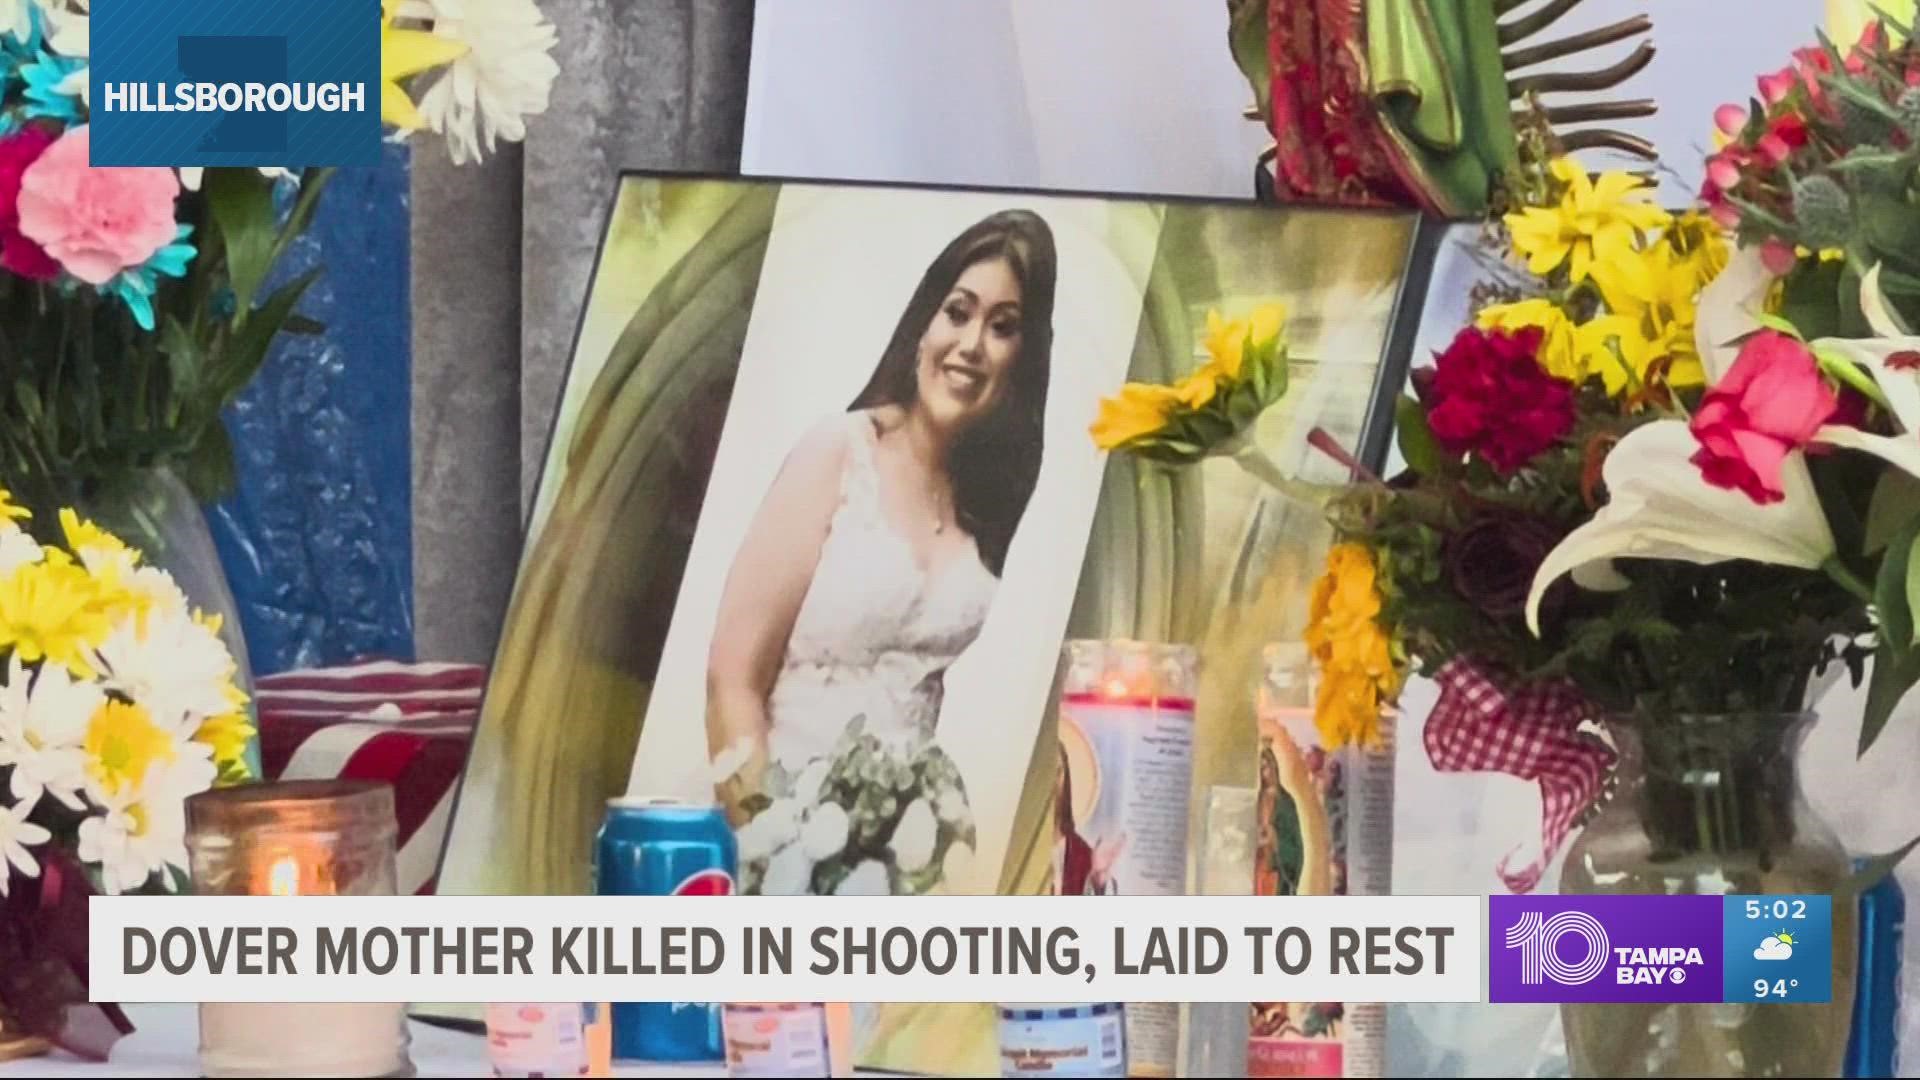 The family of Erica Negrete said their final goodbyes to her on Thursday morning, but they still want justice served in her homicide investigation.